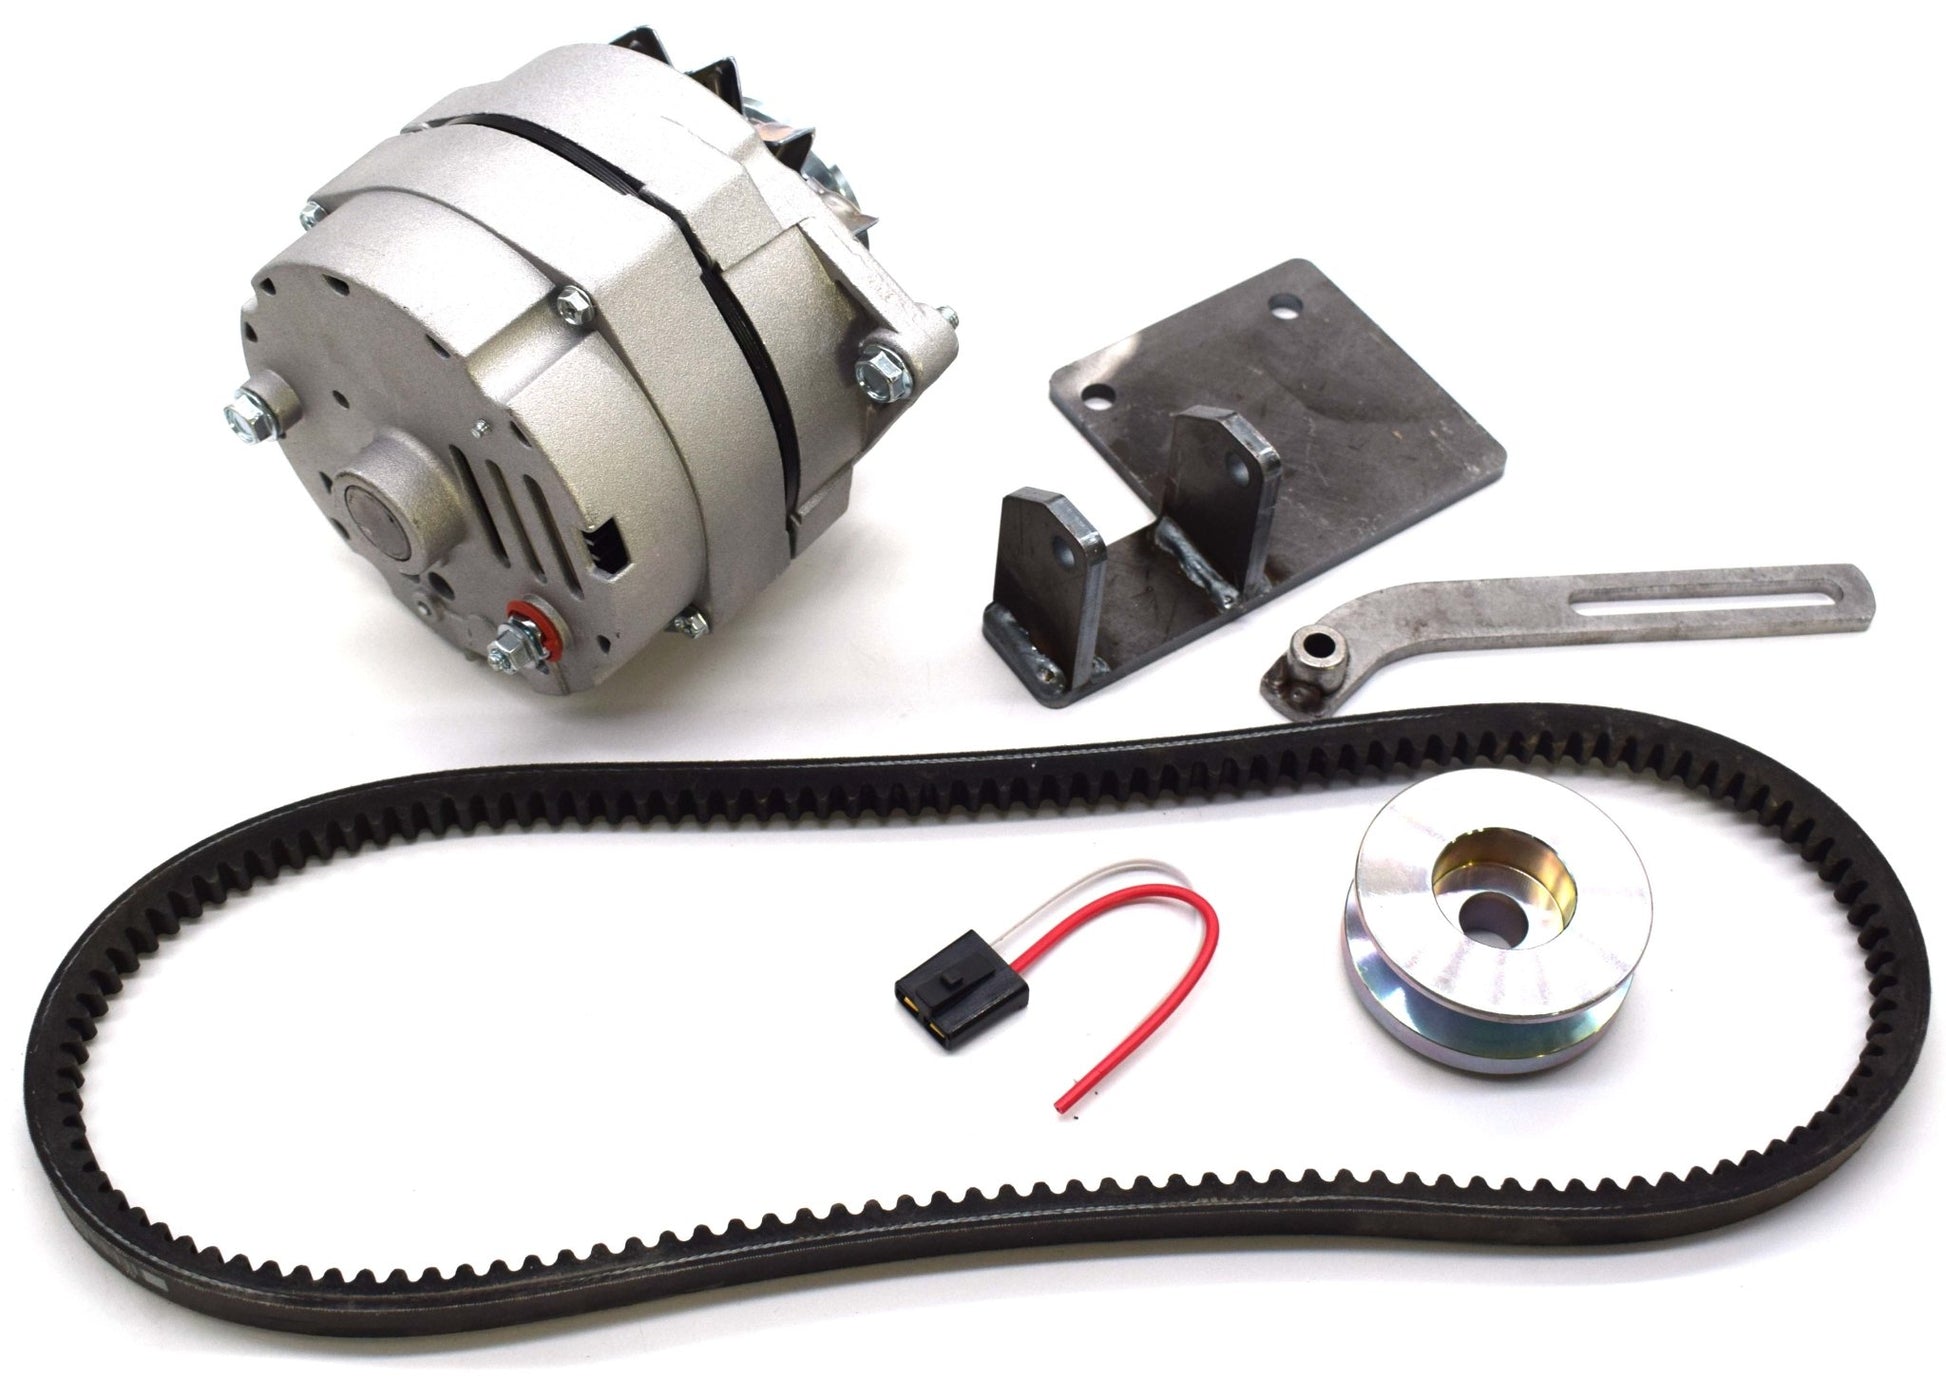 Alternator Conversion Kit, 6 Volt, 4-134, 1941-1956, Willys and Jeep Vehicles - The JeepsterMan